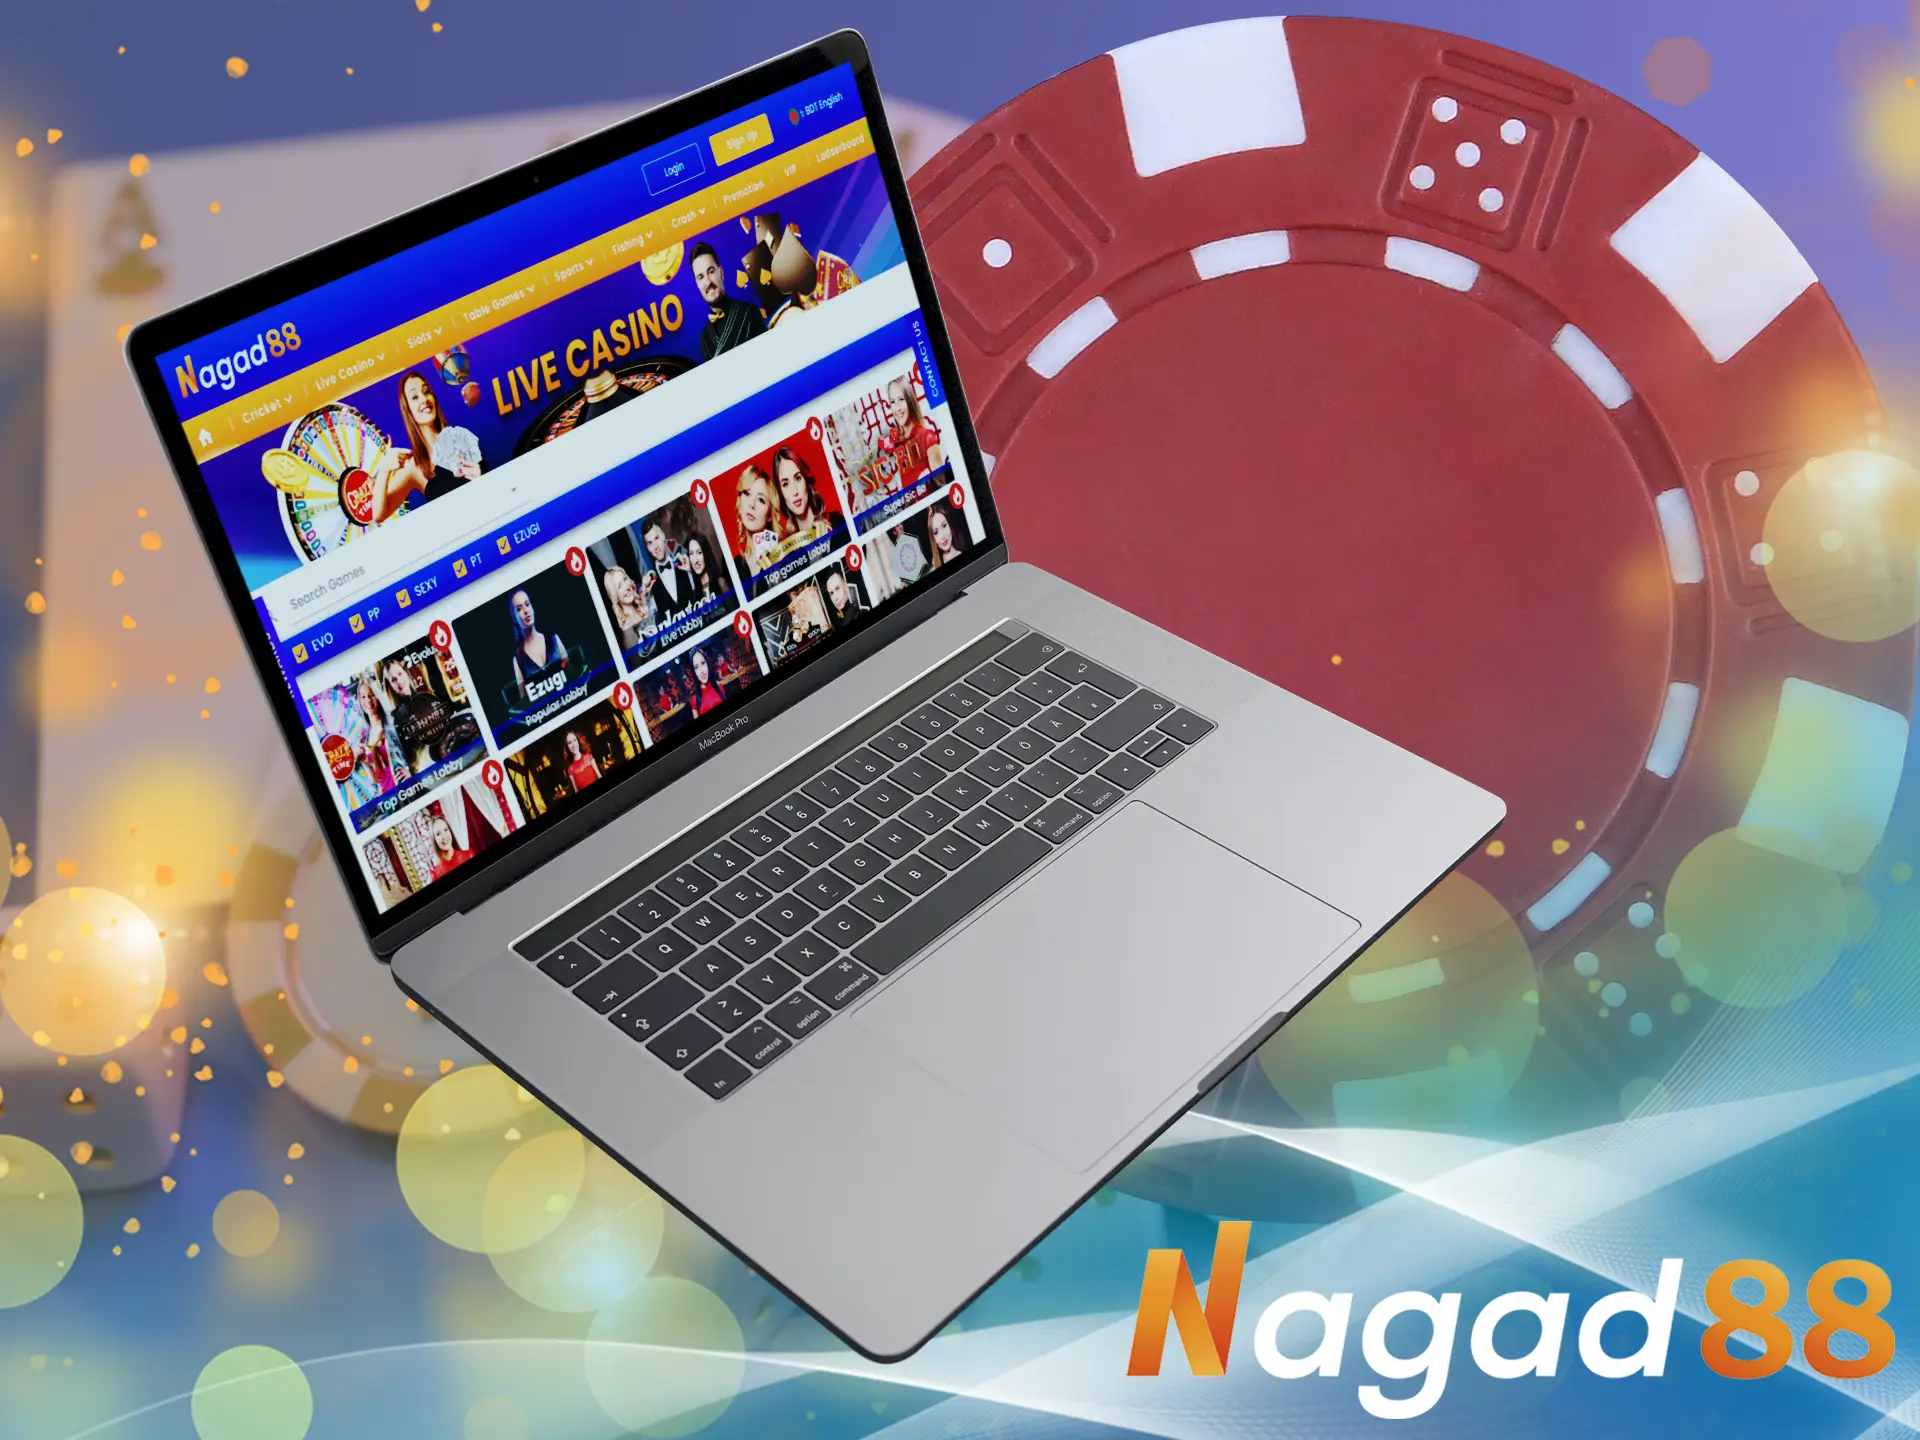 You can have a good time with the big screen of your computer, because this version of Nagad88 is universal and adapts to all resolutions.